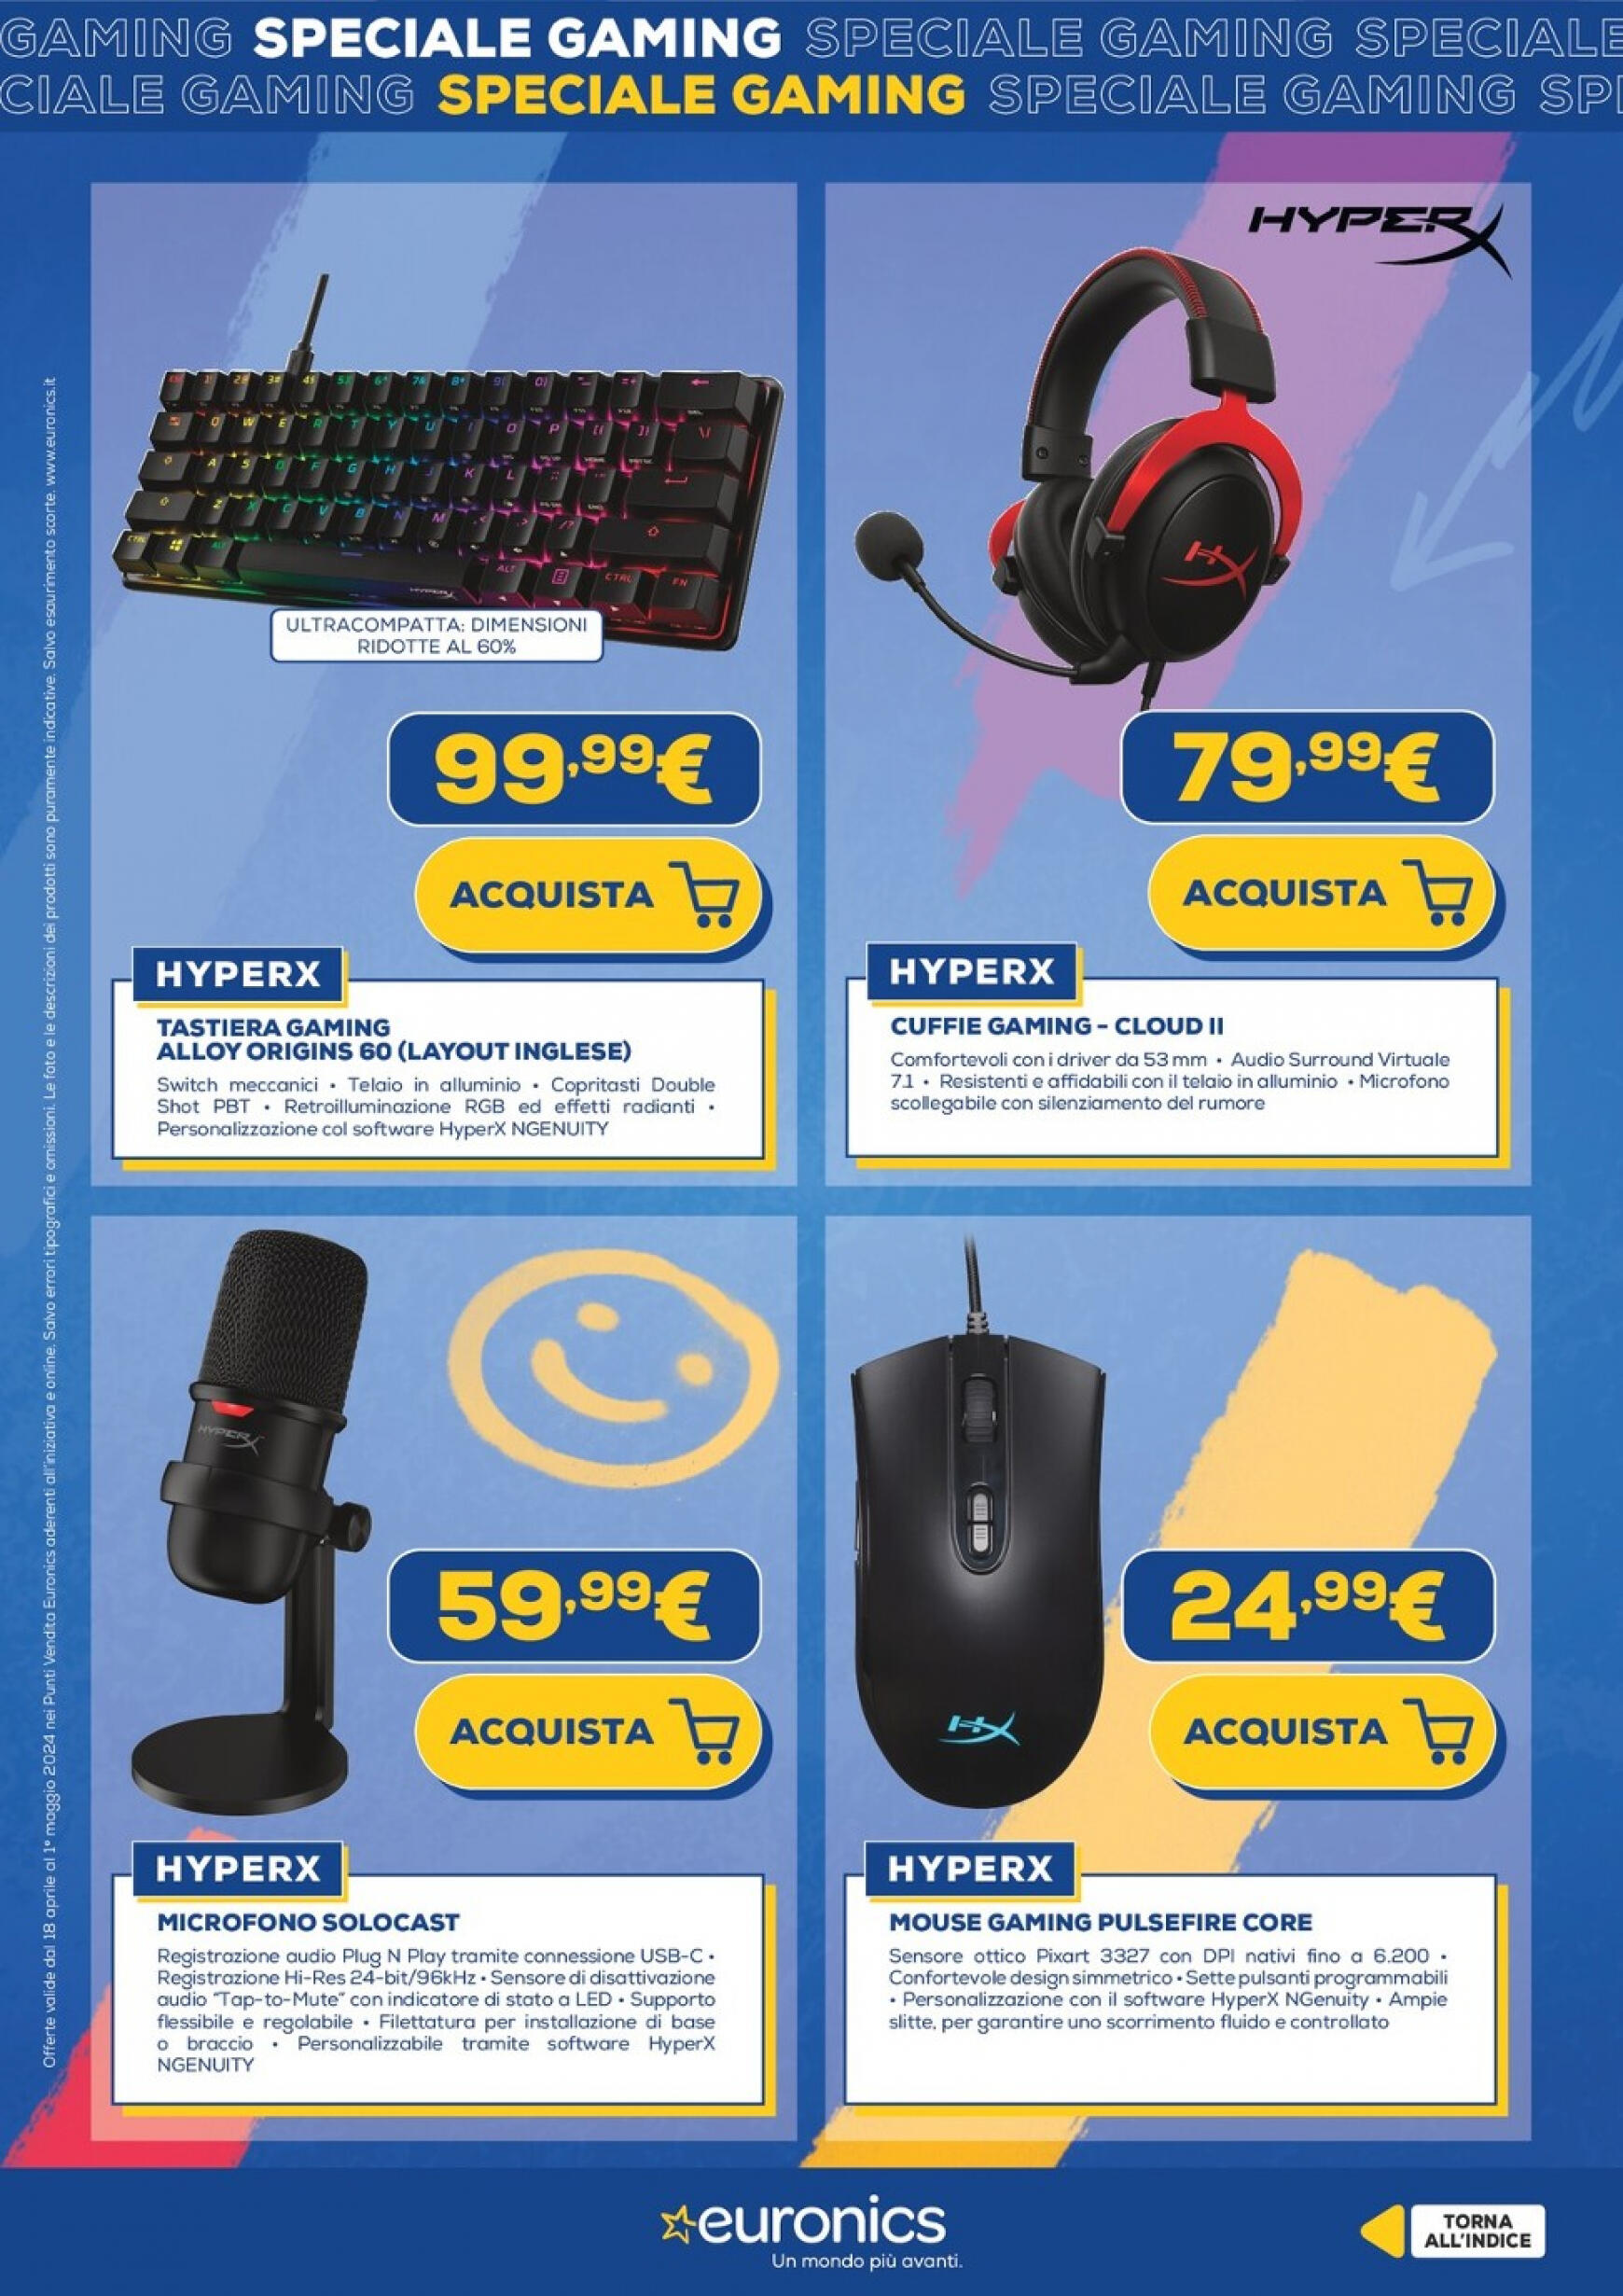 euronics - Nuovo volantino Euronics - Speciale Gaming 18.04. - 01.05. - page: 15